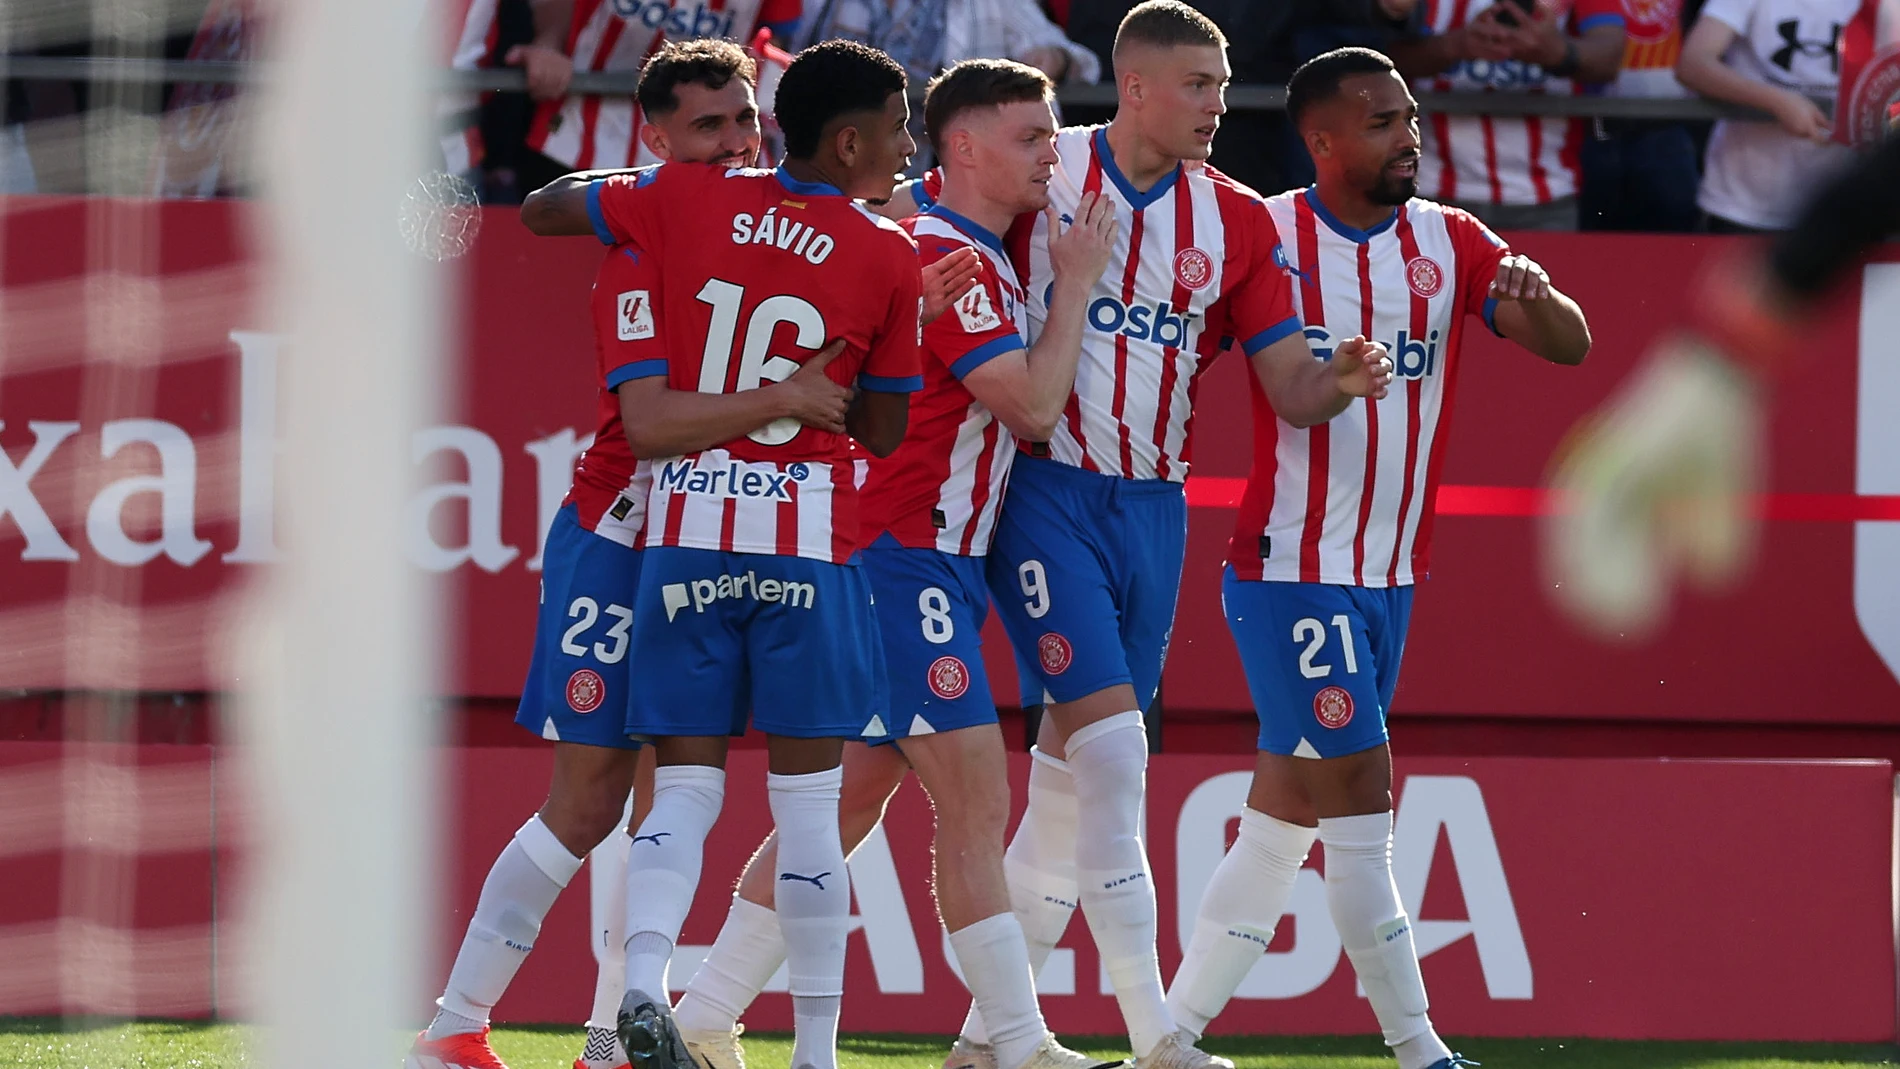 04 May 2024, Spain, Giron: Girona's Artem Dovbyk (2nd R) celebrates scoring his side's first goal with teammates during the Spanish Primera Division La Liga soccer match between Girona FC and FC Barcelona at Estadio de Montilivi. Photo: David Ramirez/DAX via ZUMA Press Wire/dpa David Ramirez/DAX via ZUMA Press / DPA 04/05/2024 ONLY FOR USE IN SPAIN